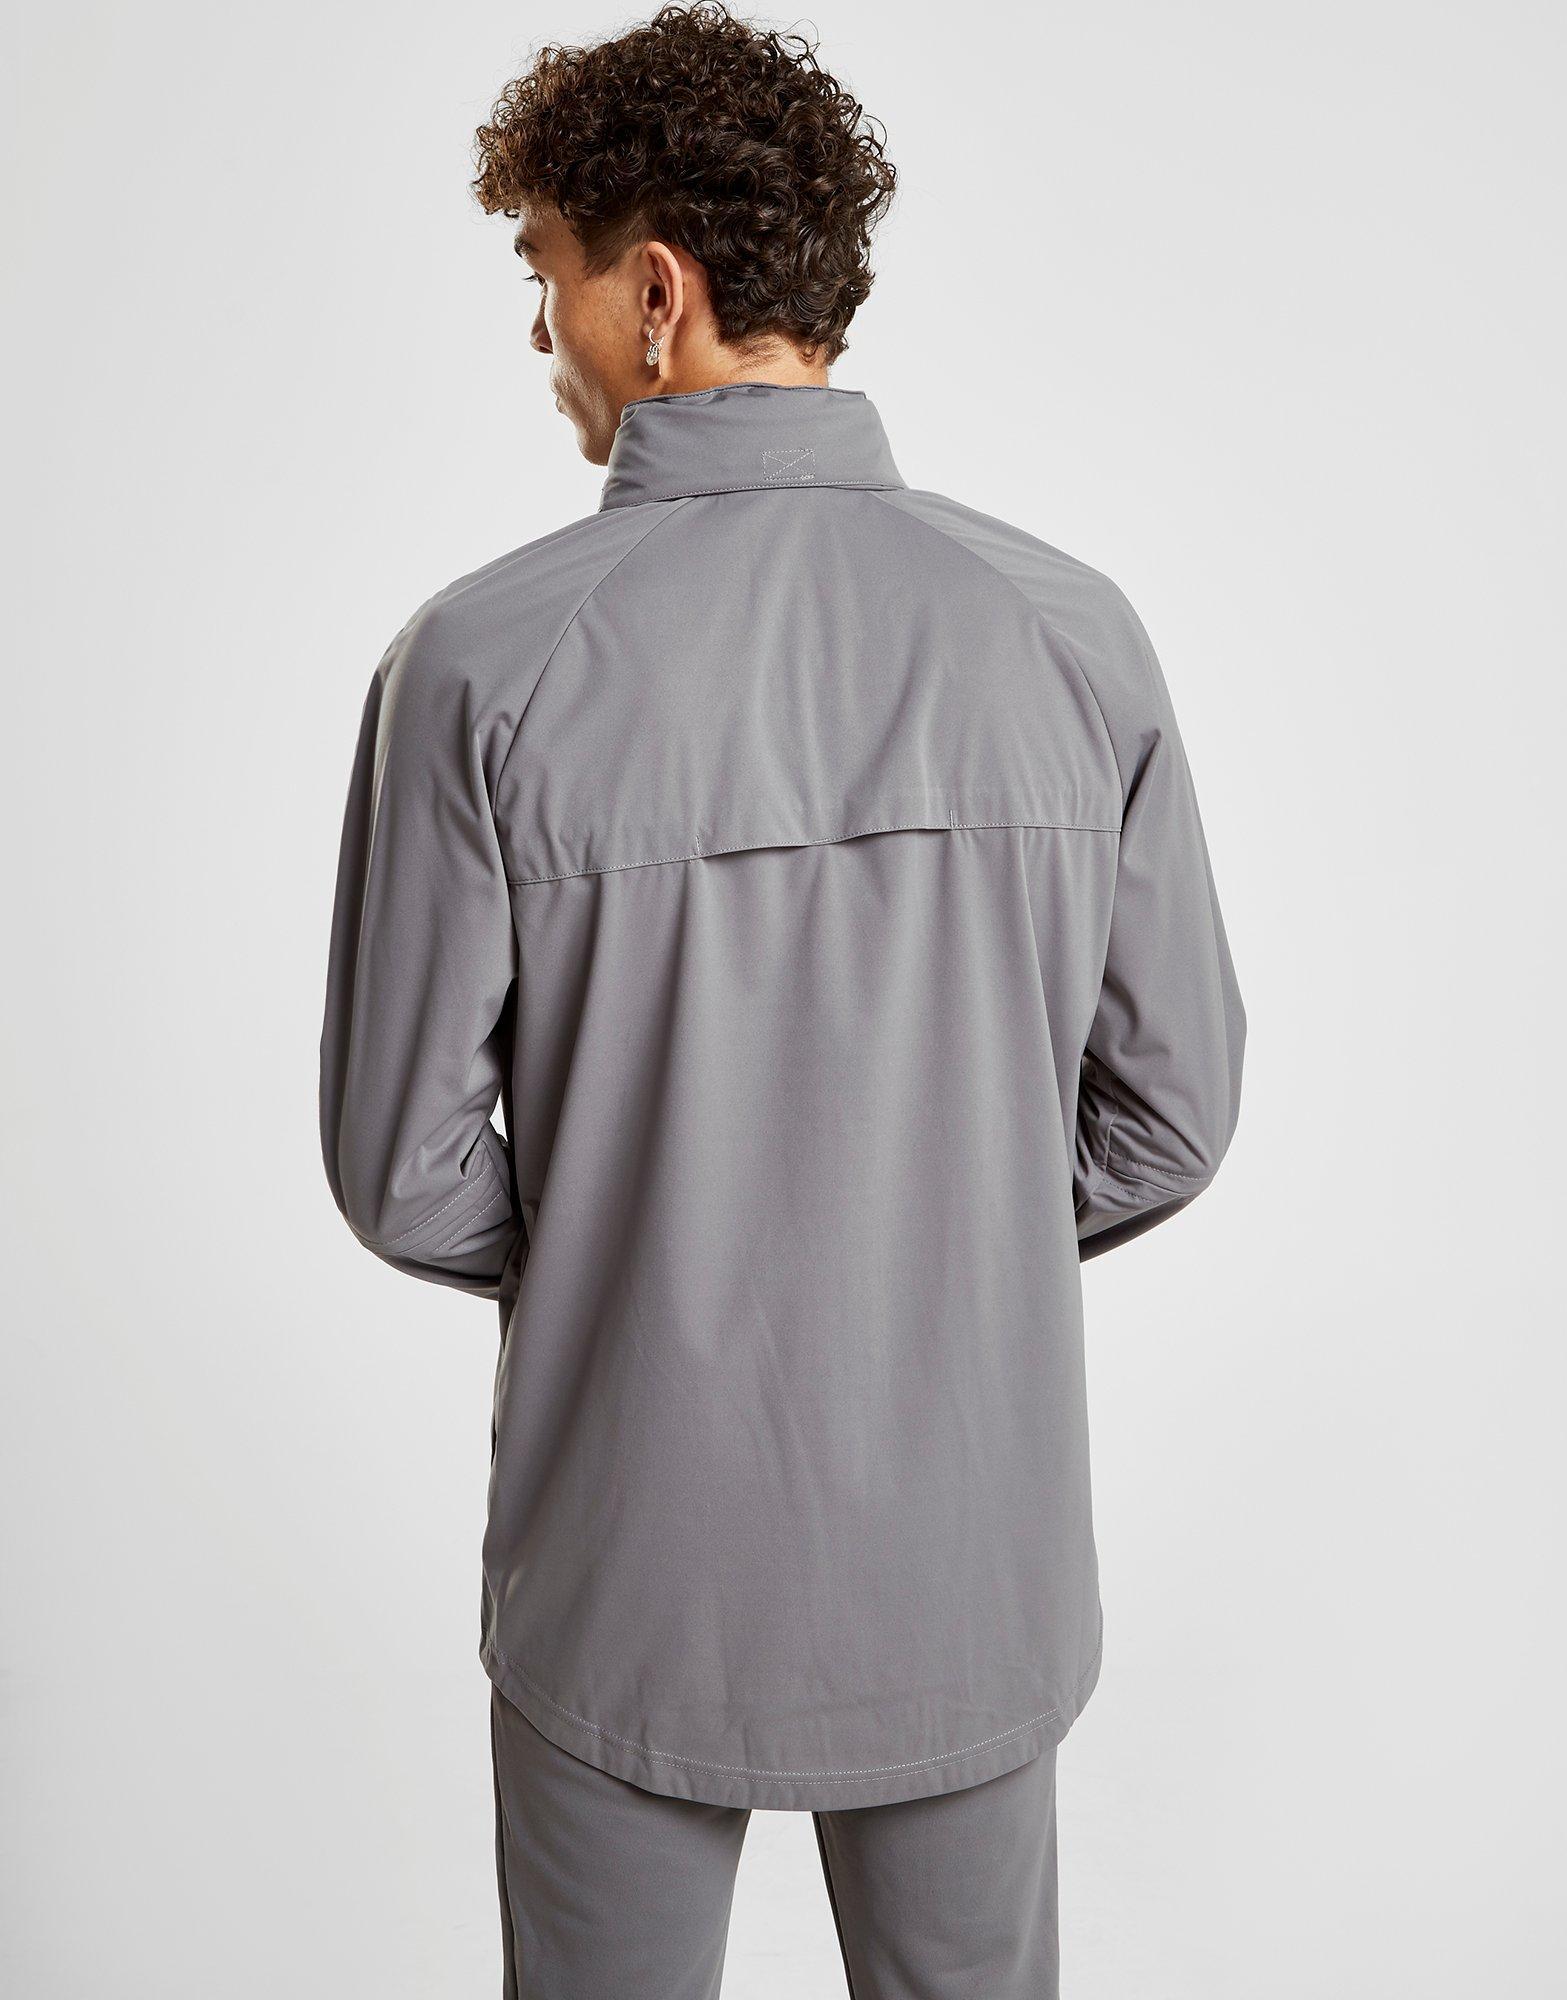 New Balance Synthetic Liverpool Fc Rain Jacket in Grey (Gray) for Men